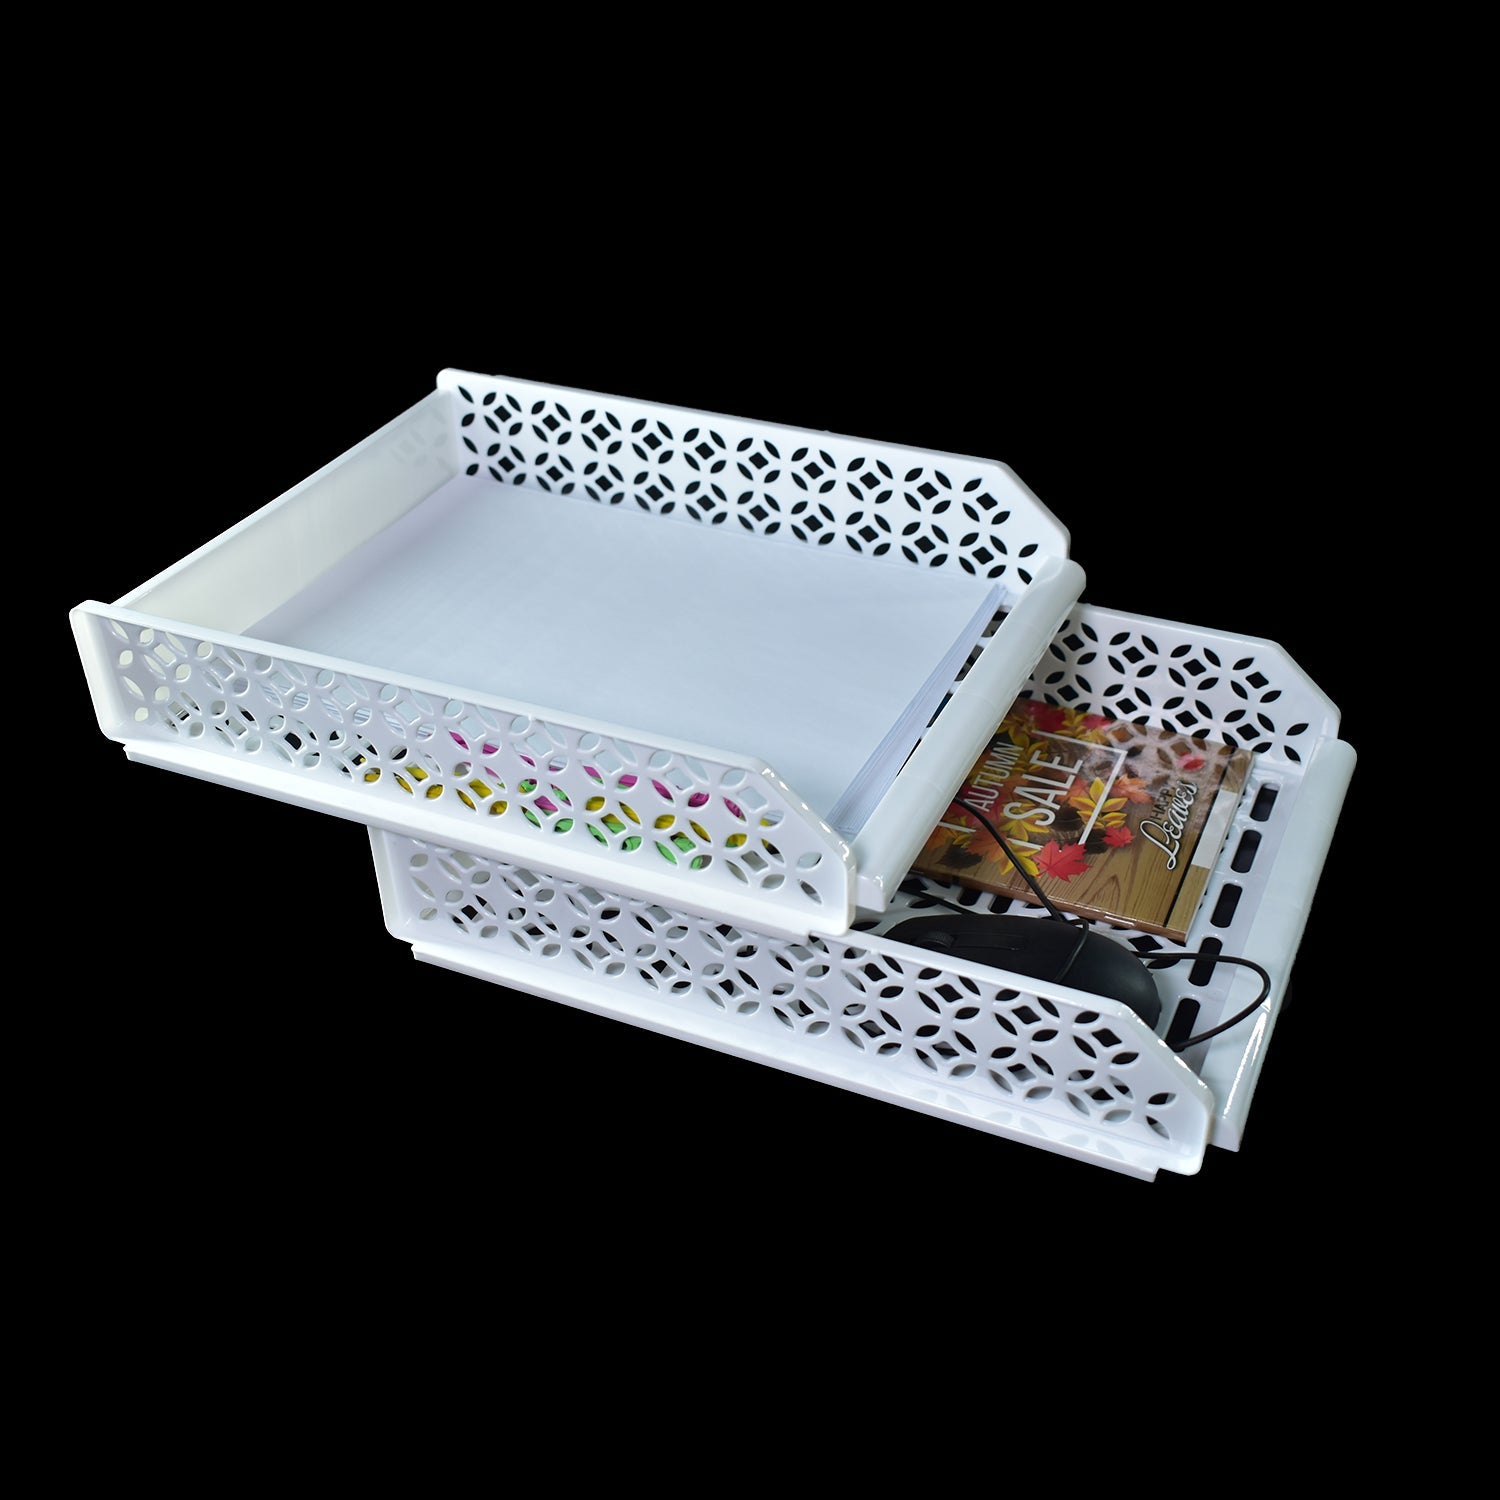 4830 2 Pc Drawer Organizer Used For Storing Various Types Of Important Stuffs And Items.